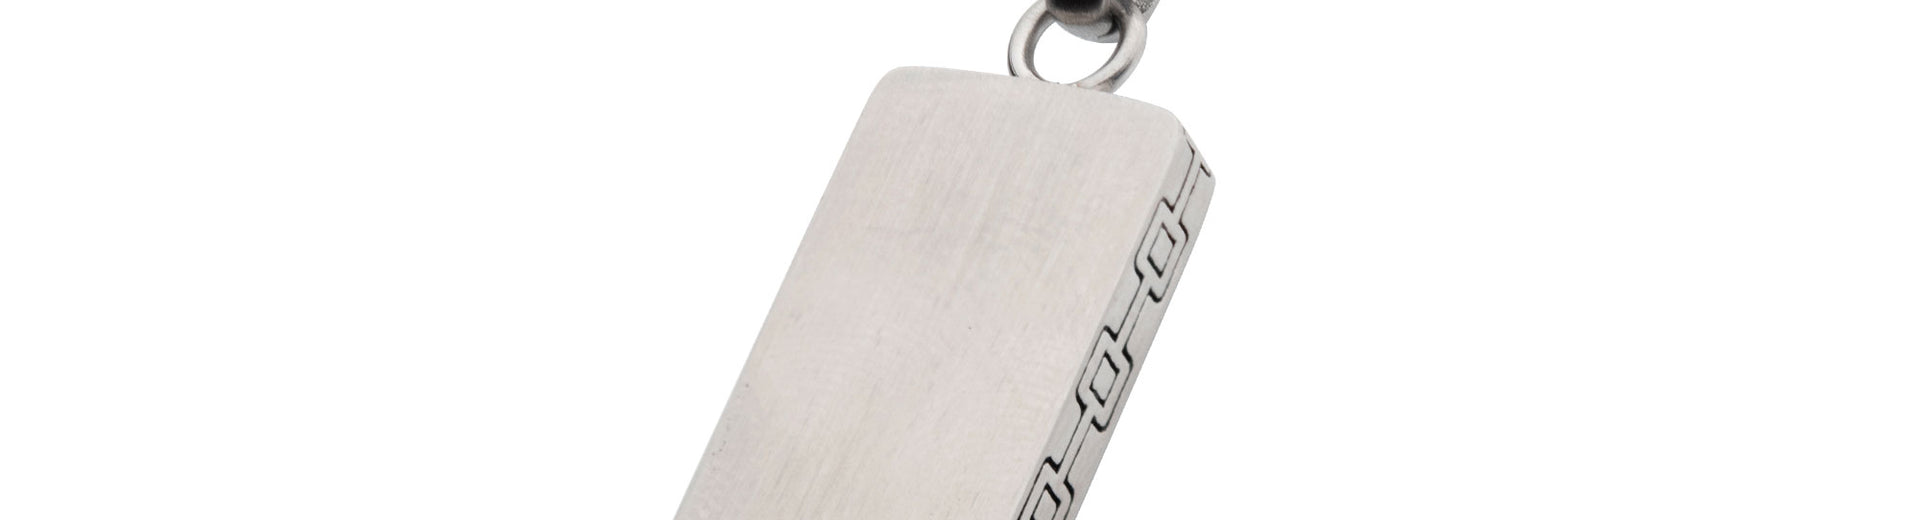 Stainless Steel 55cm Engrave Pendant